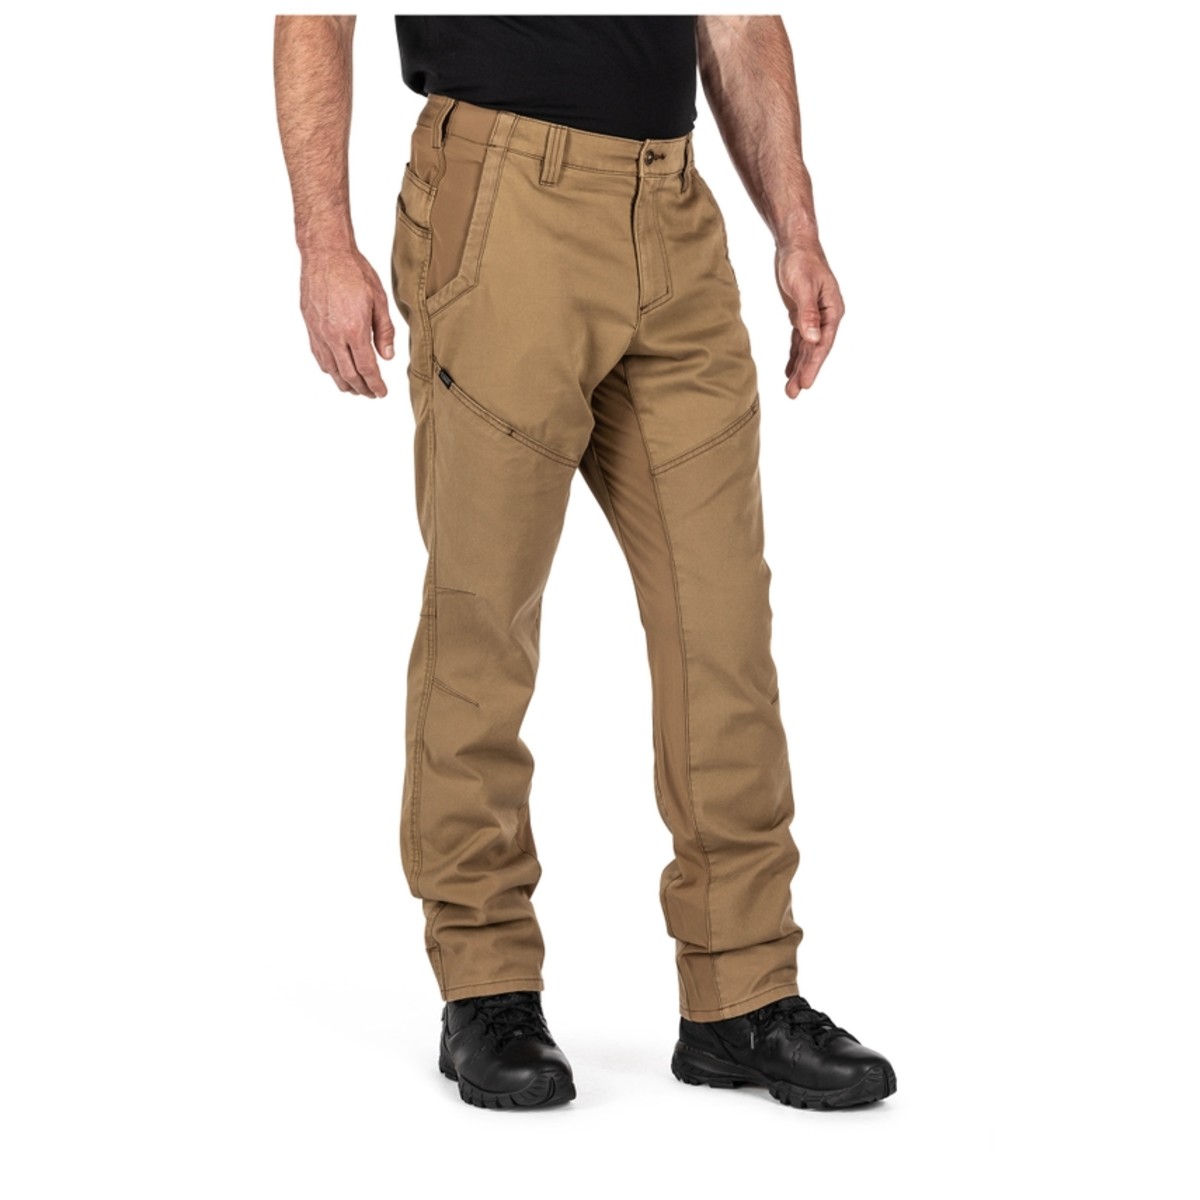 5.11 overland tactical pants